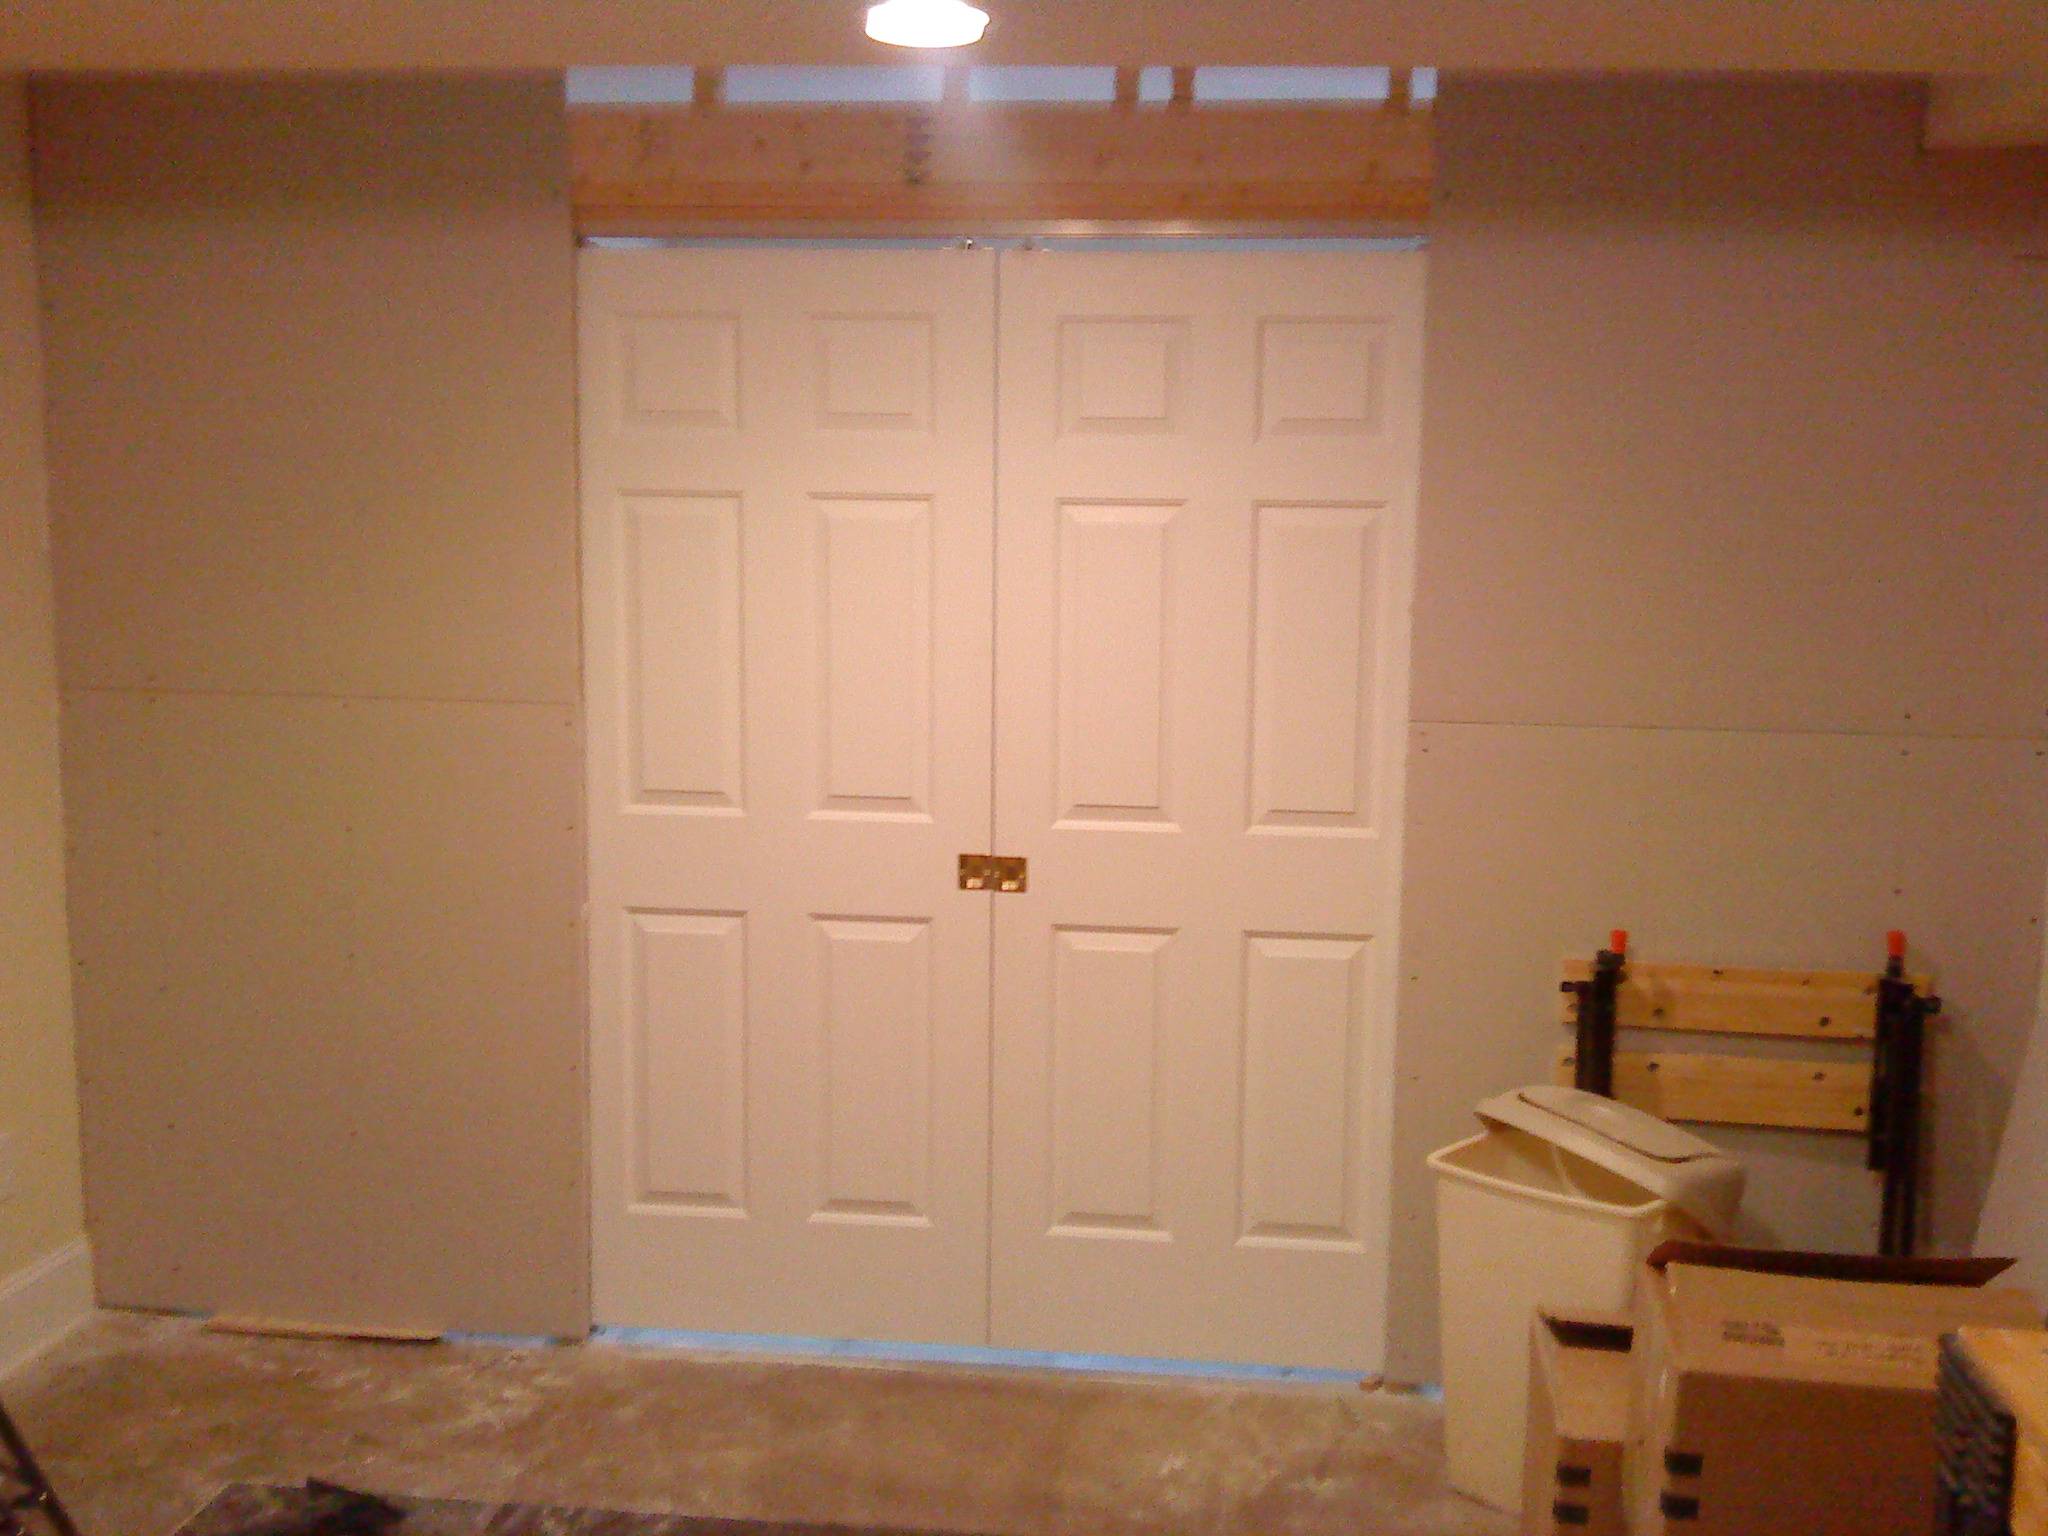 Workshop doors and electrical